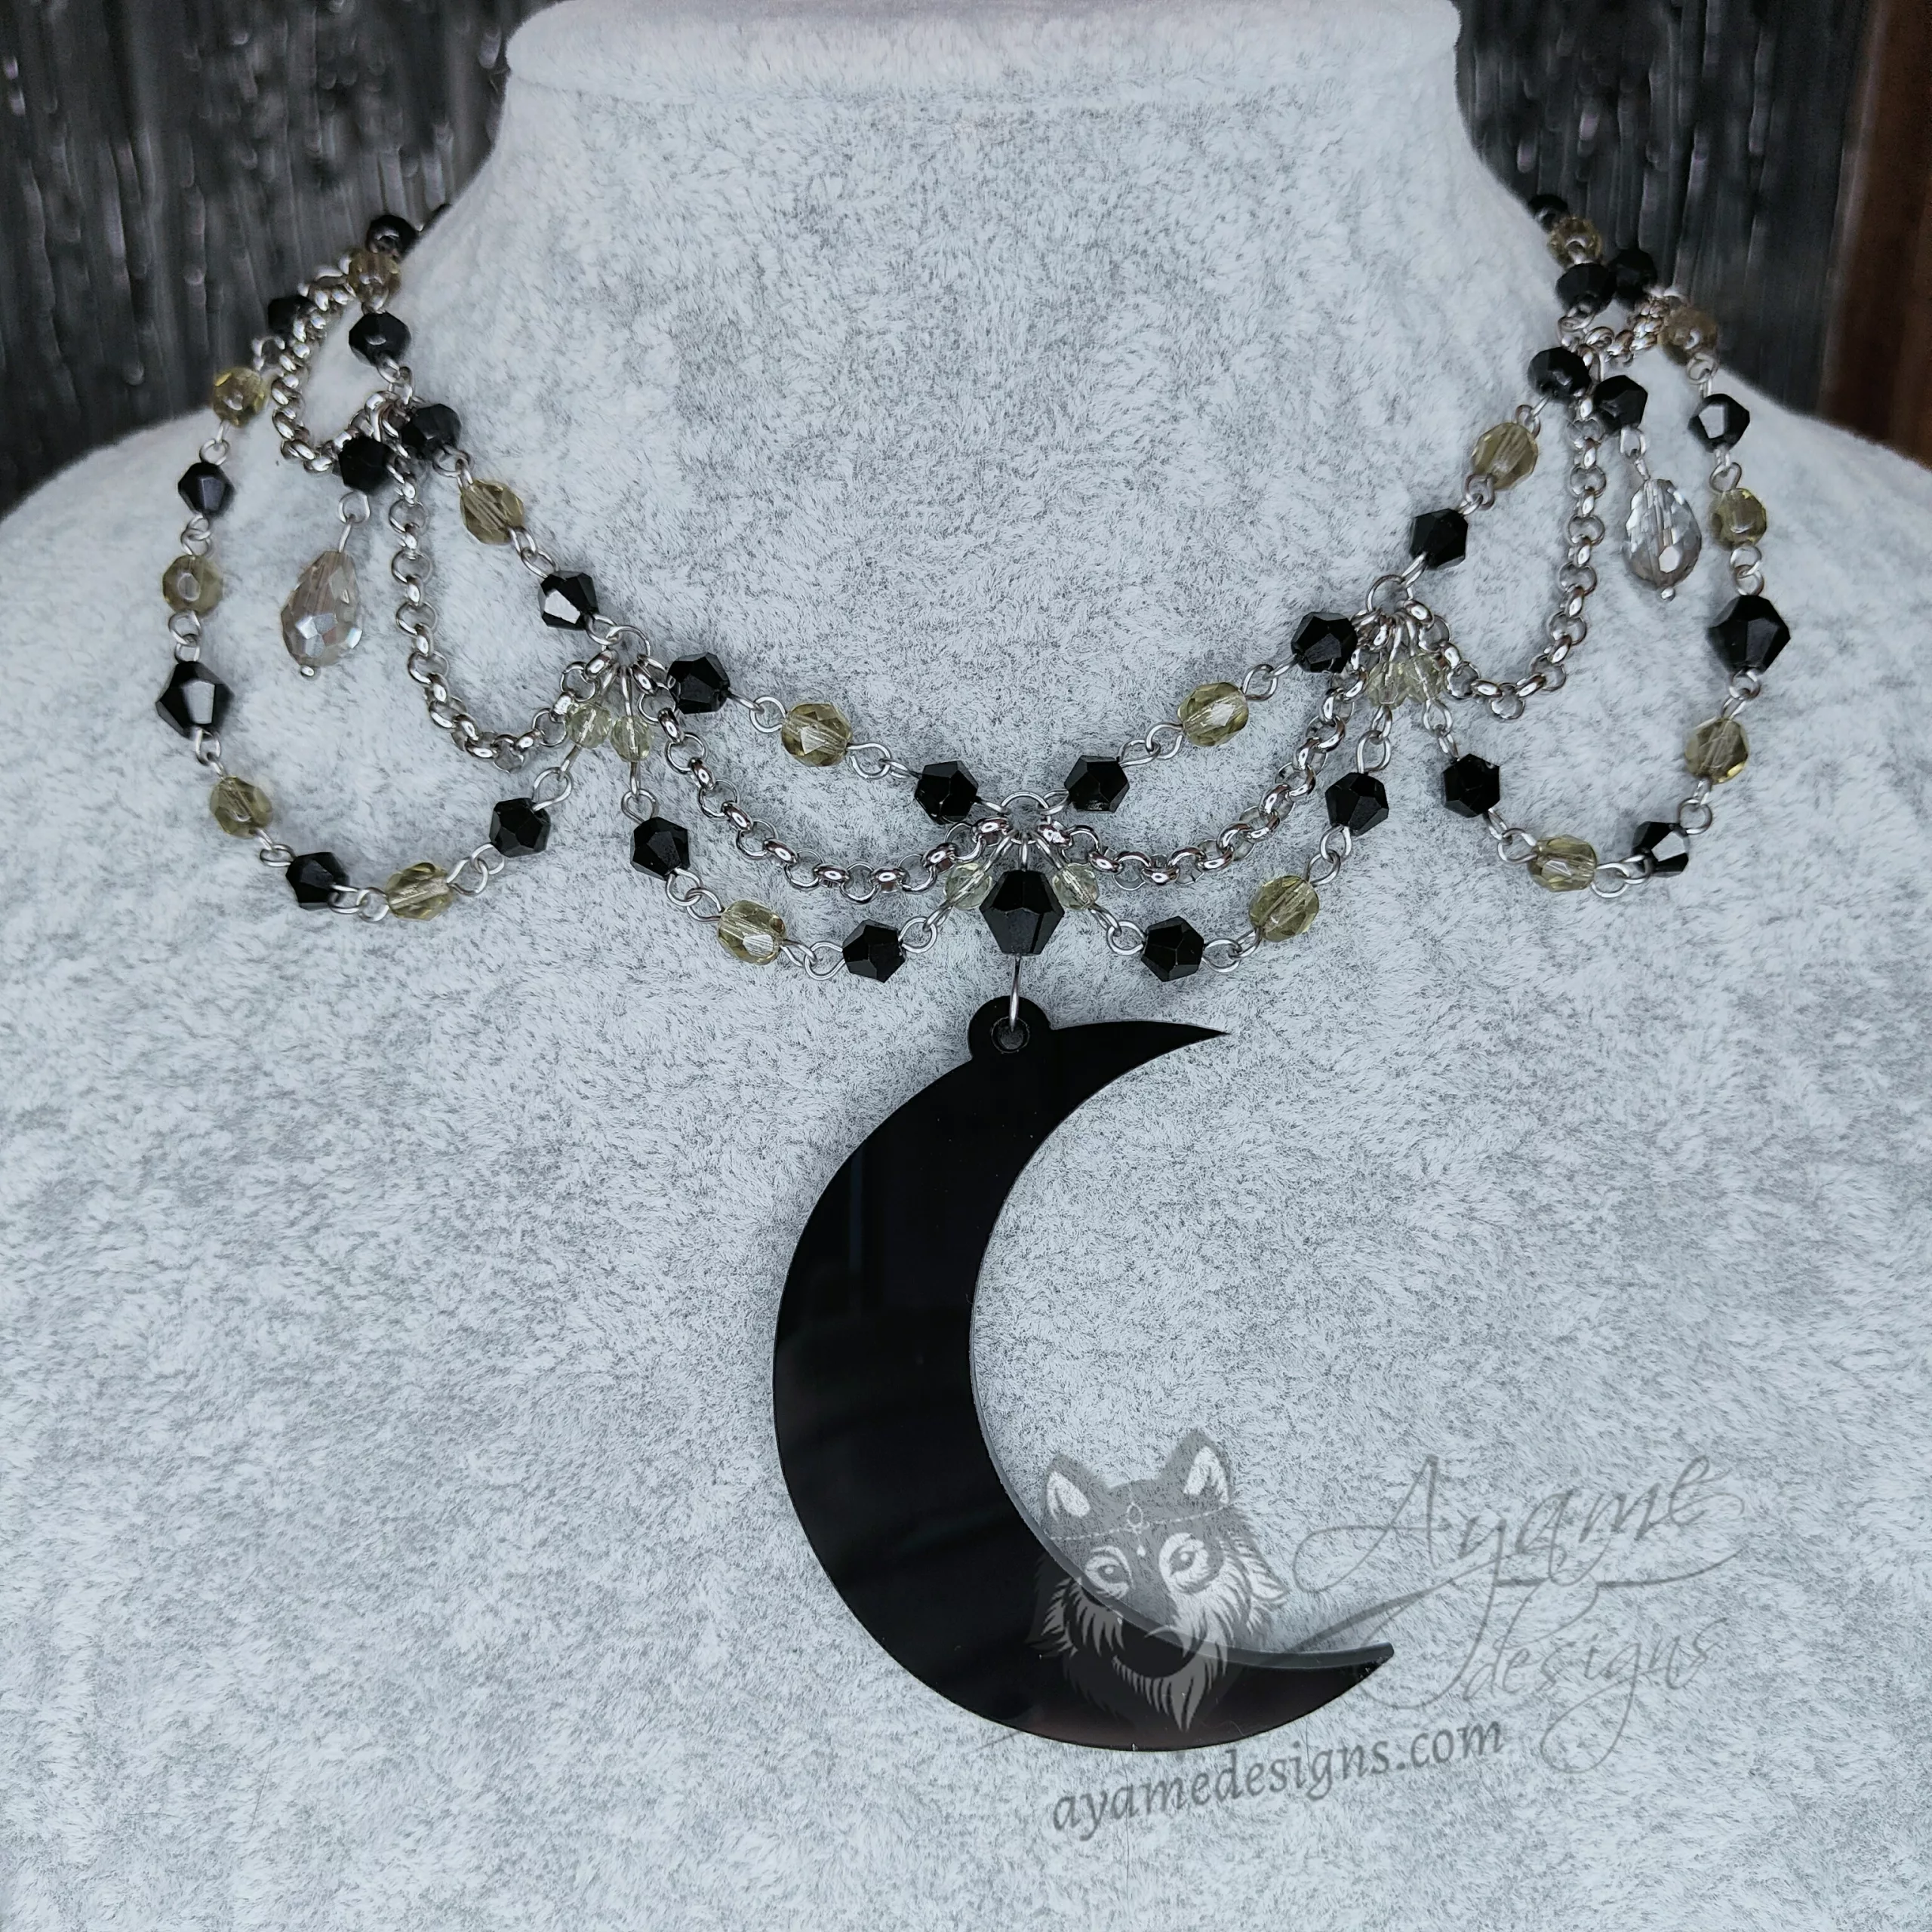 The Night Queen Stainless Steel Beaded Choker Necklace - Ayame Designs